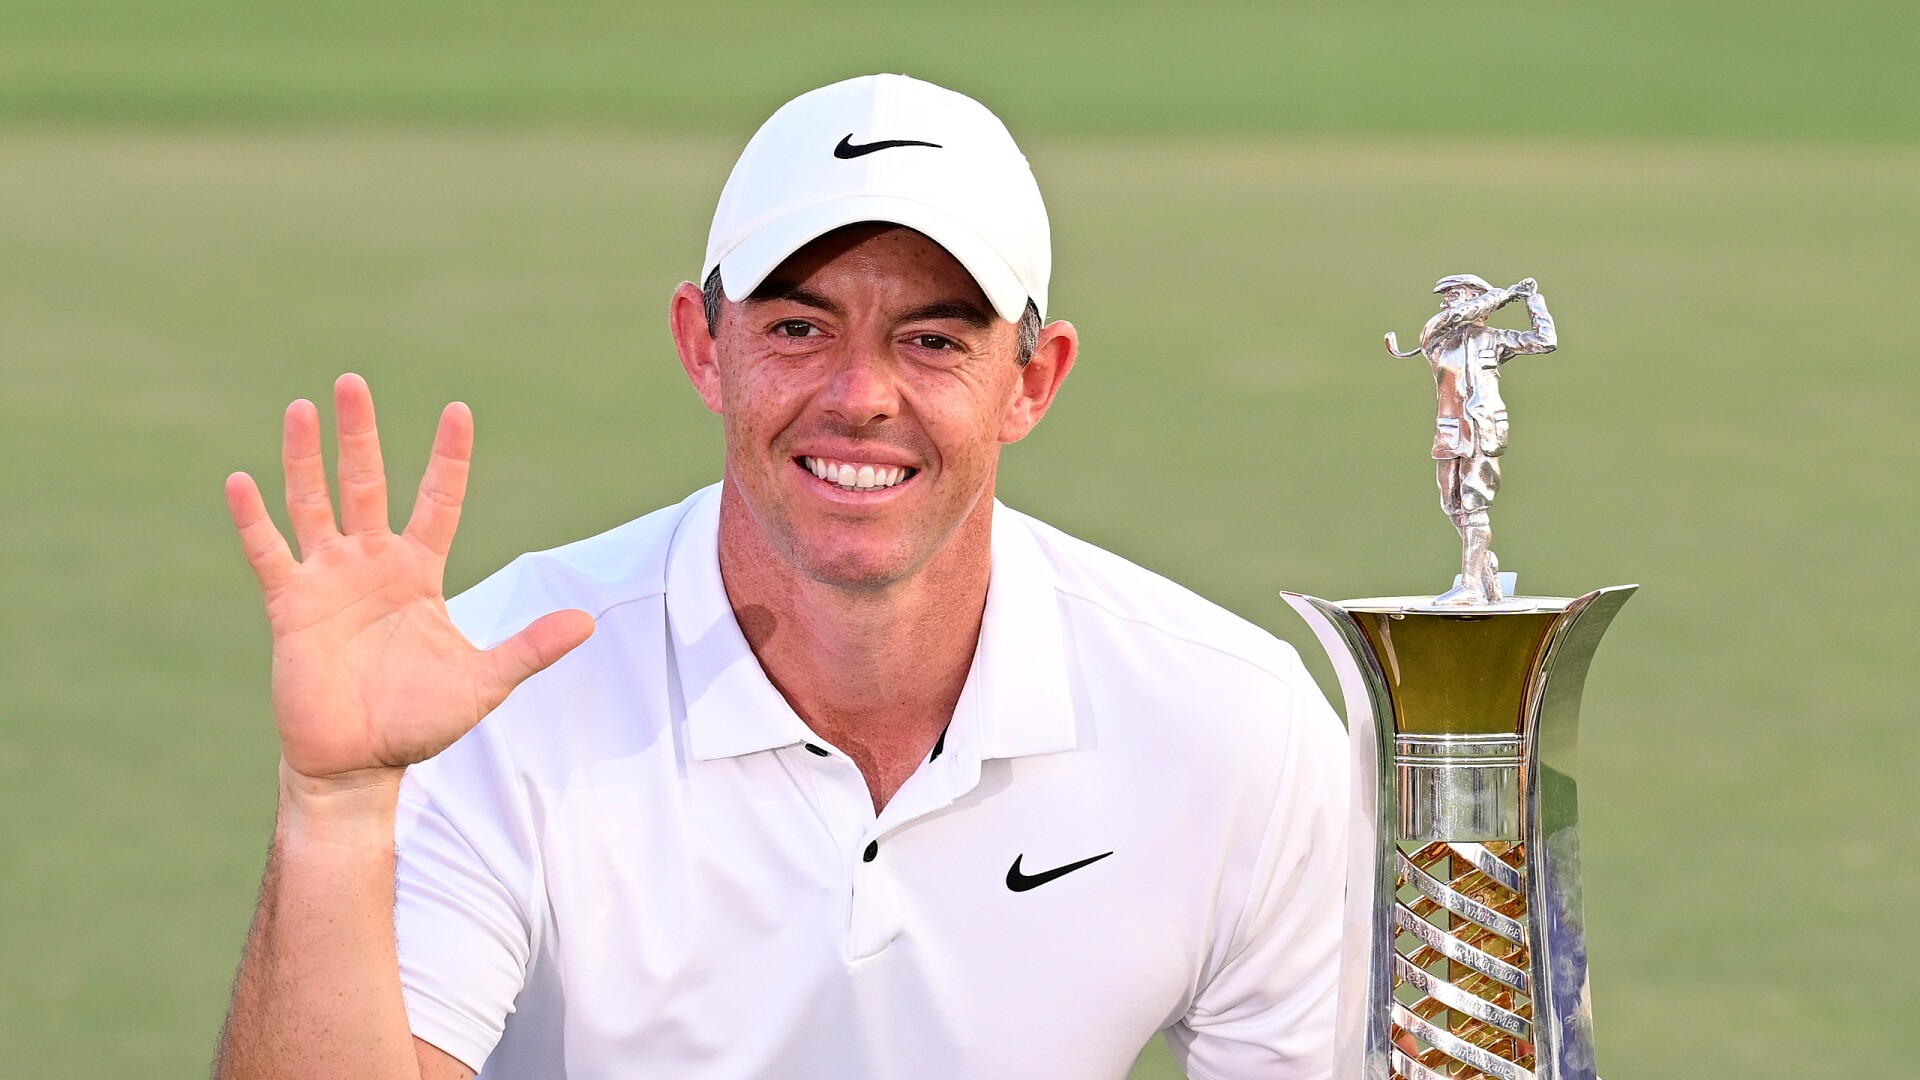 mcilroy: rollback puts golf 'back on a path of sustainability'